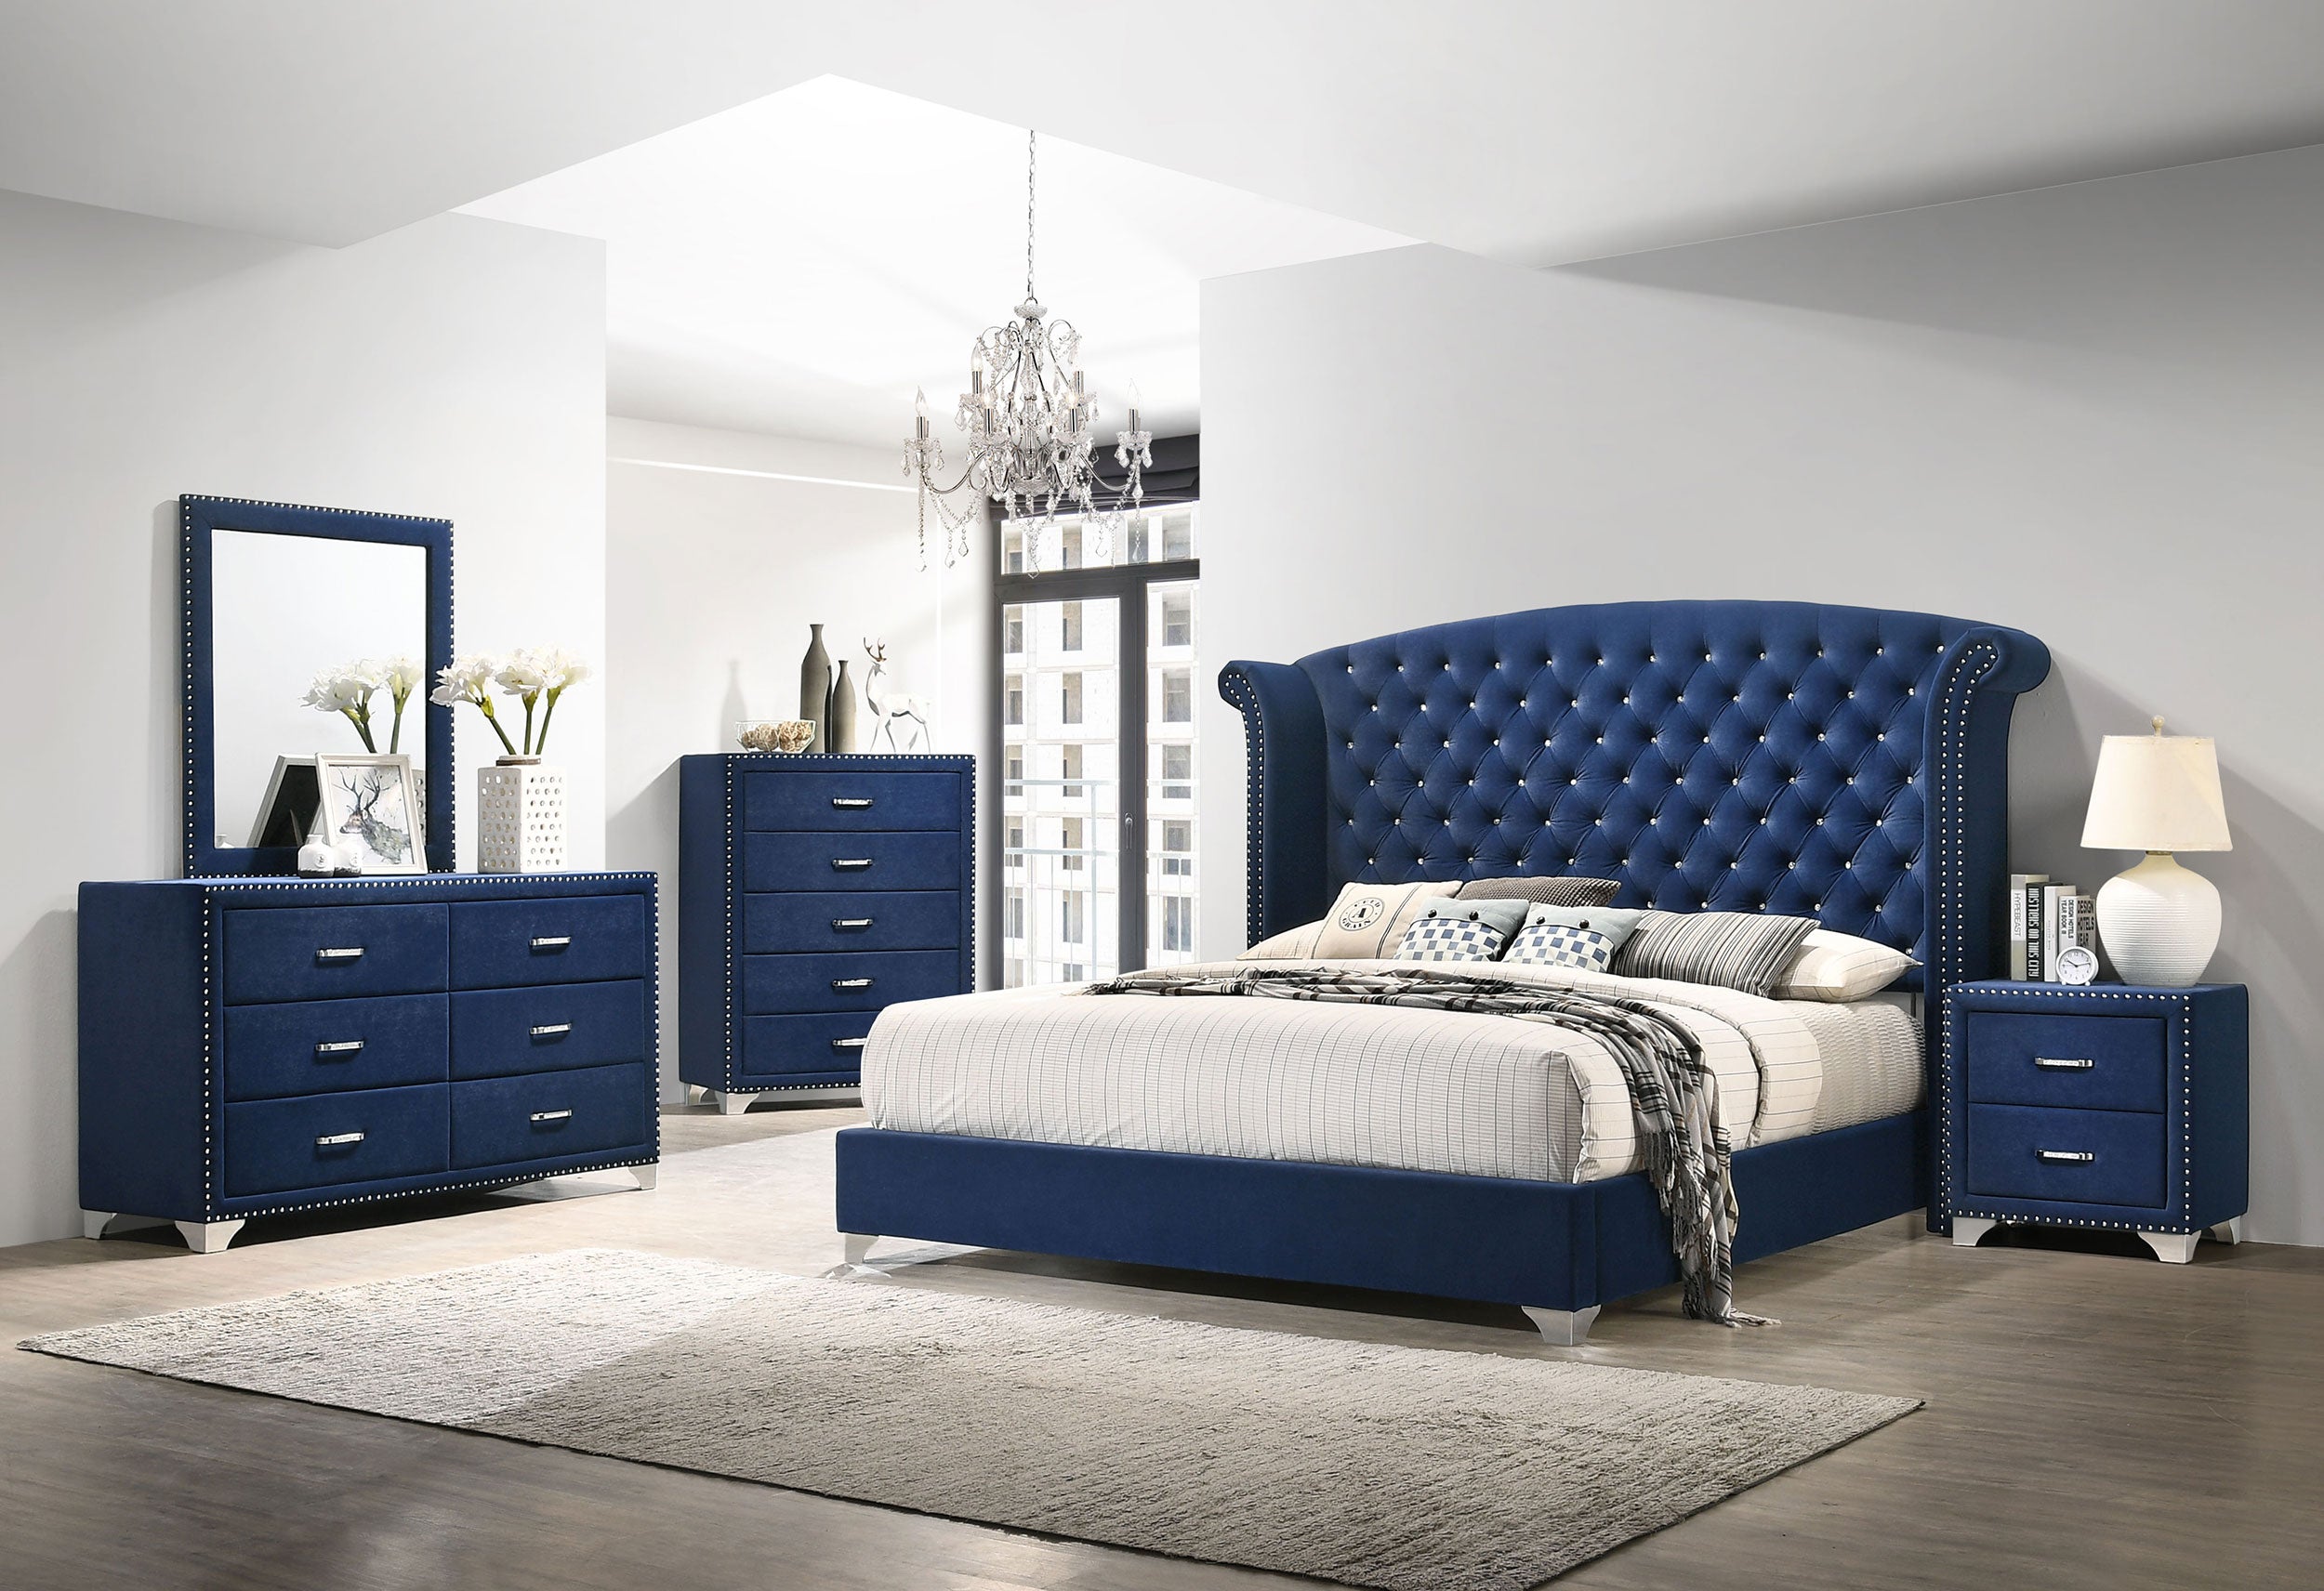 Coaster Melody Tufted Upholstered Bedroom Set Pacific Blue Queen Set of 4